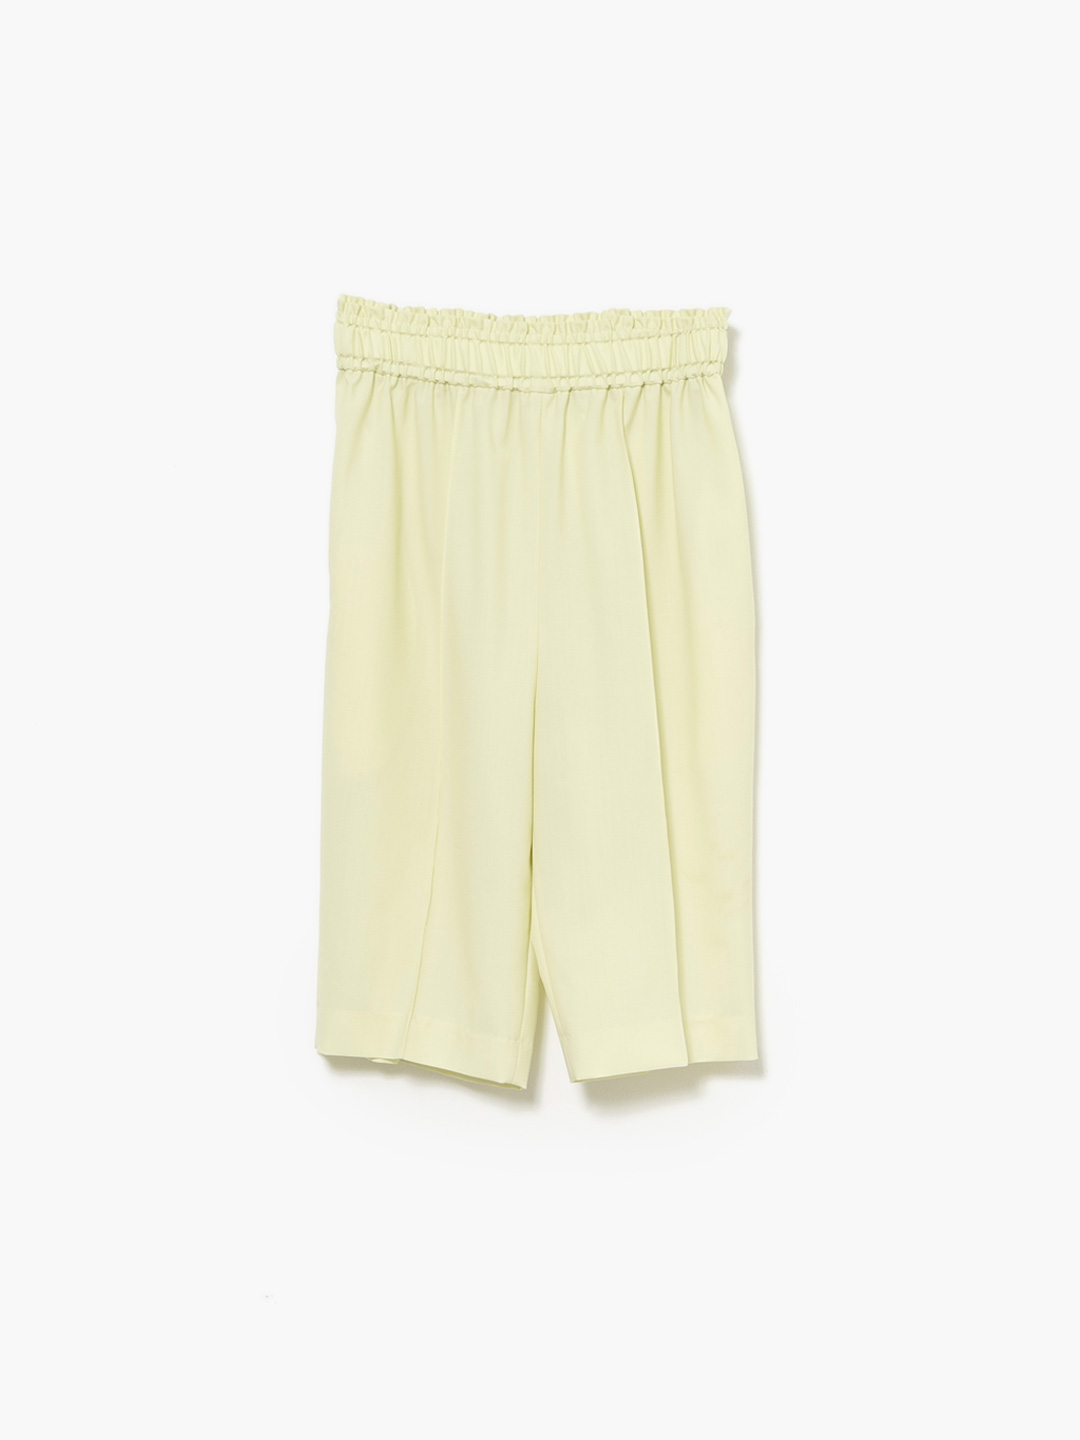 Wool Easy Short Trousers - Light Yellow